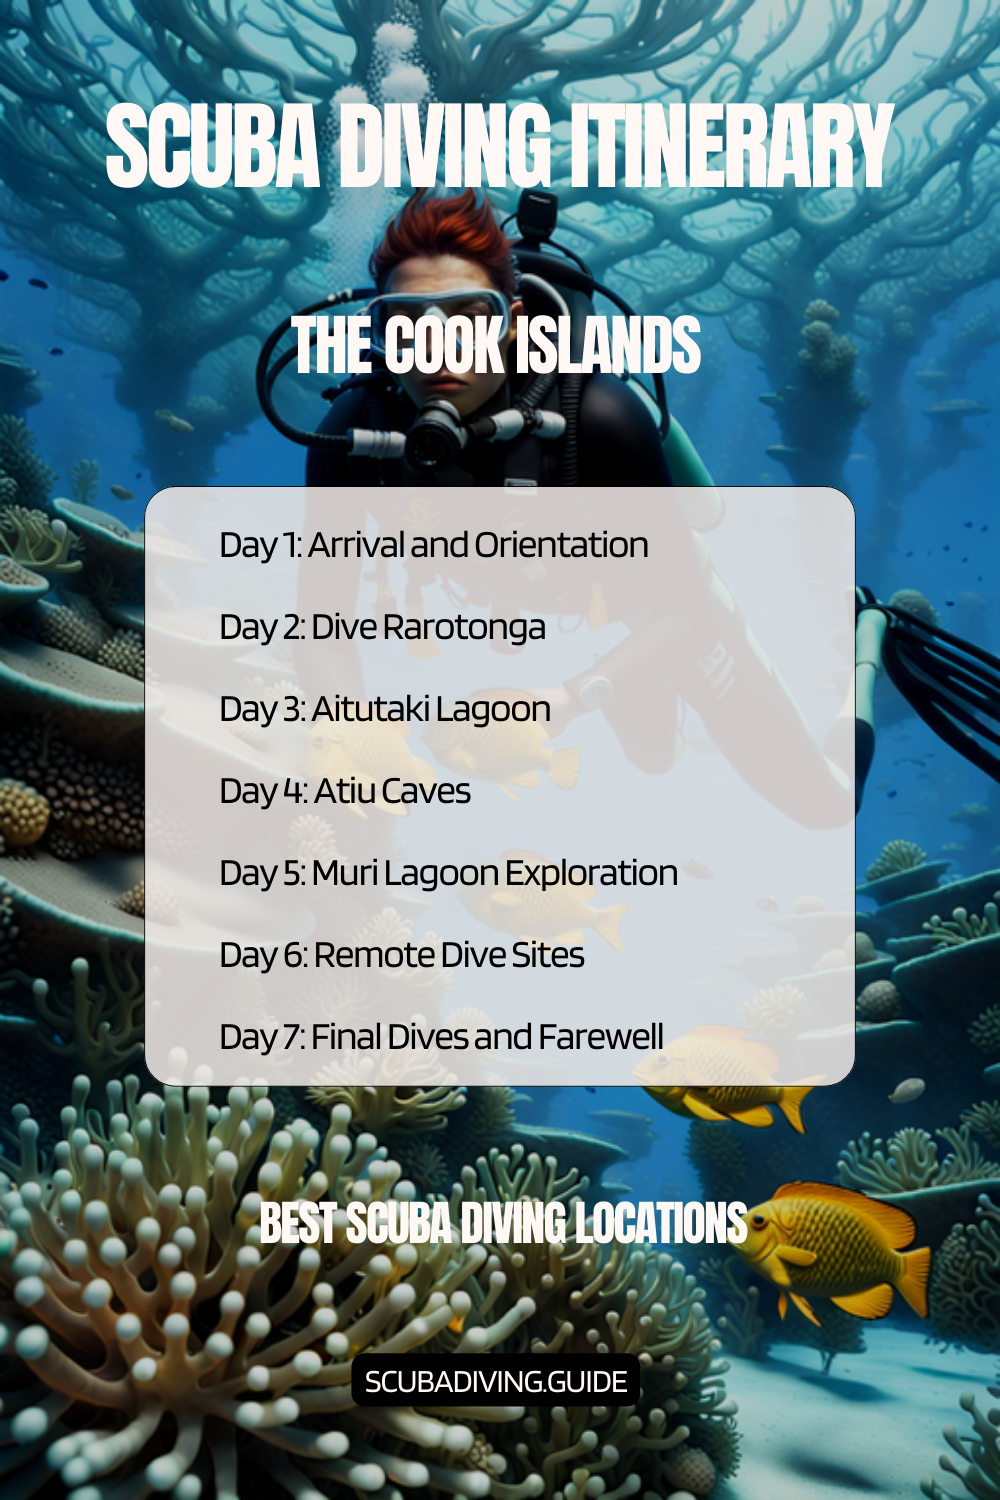 The Cook Islands Recommended Scuba Diving Itinerary